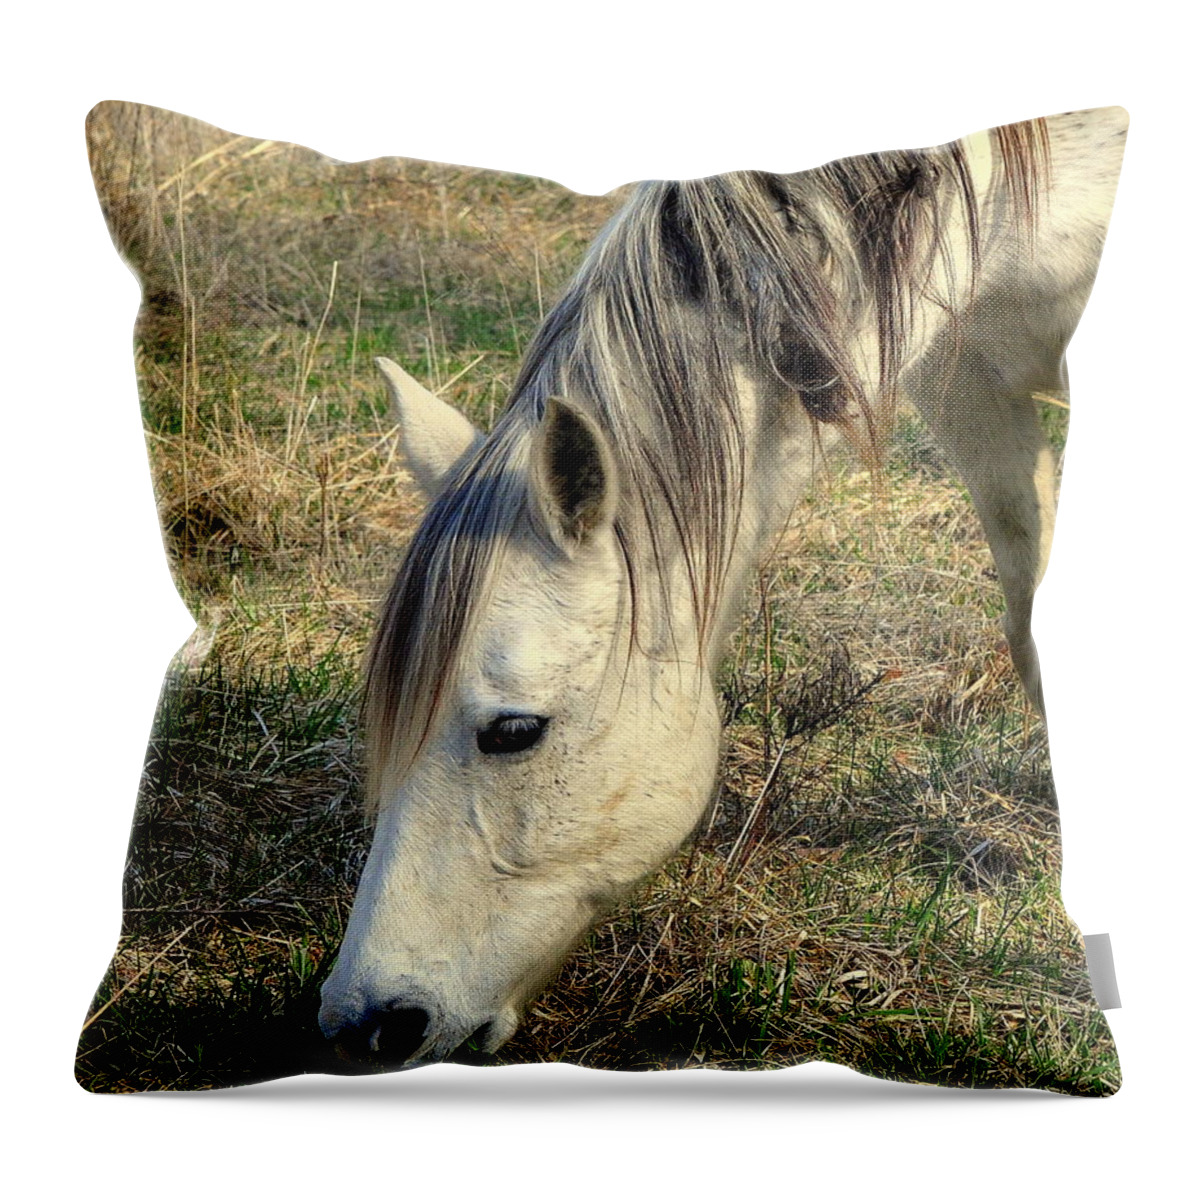 Horses Throw Pillow featuring the photograph Dinner Time by Marty Koch